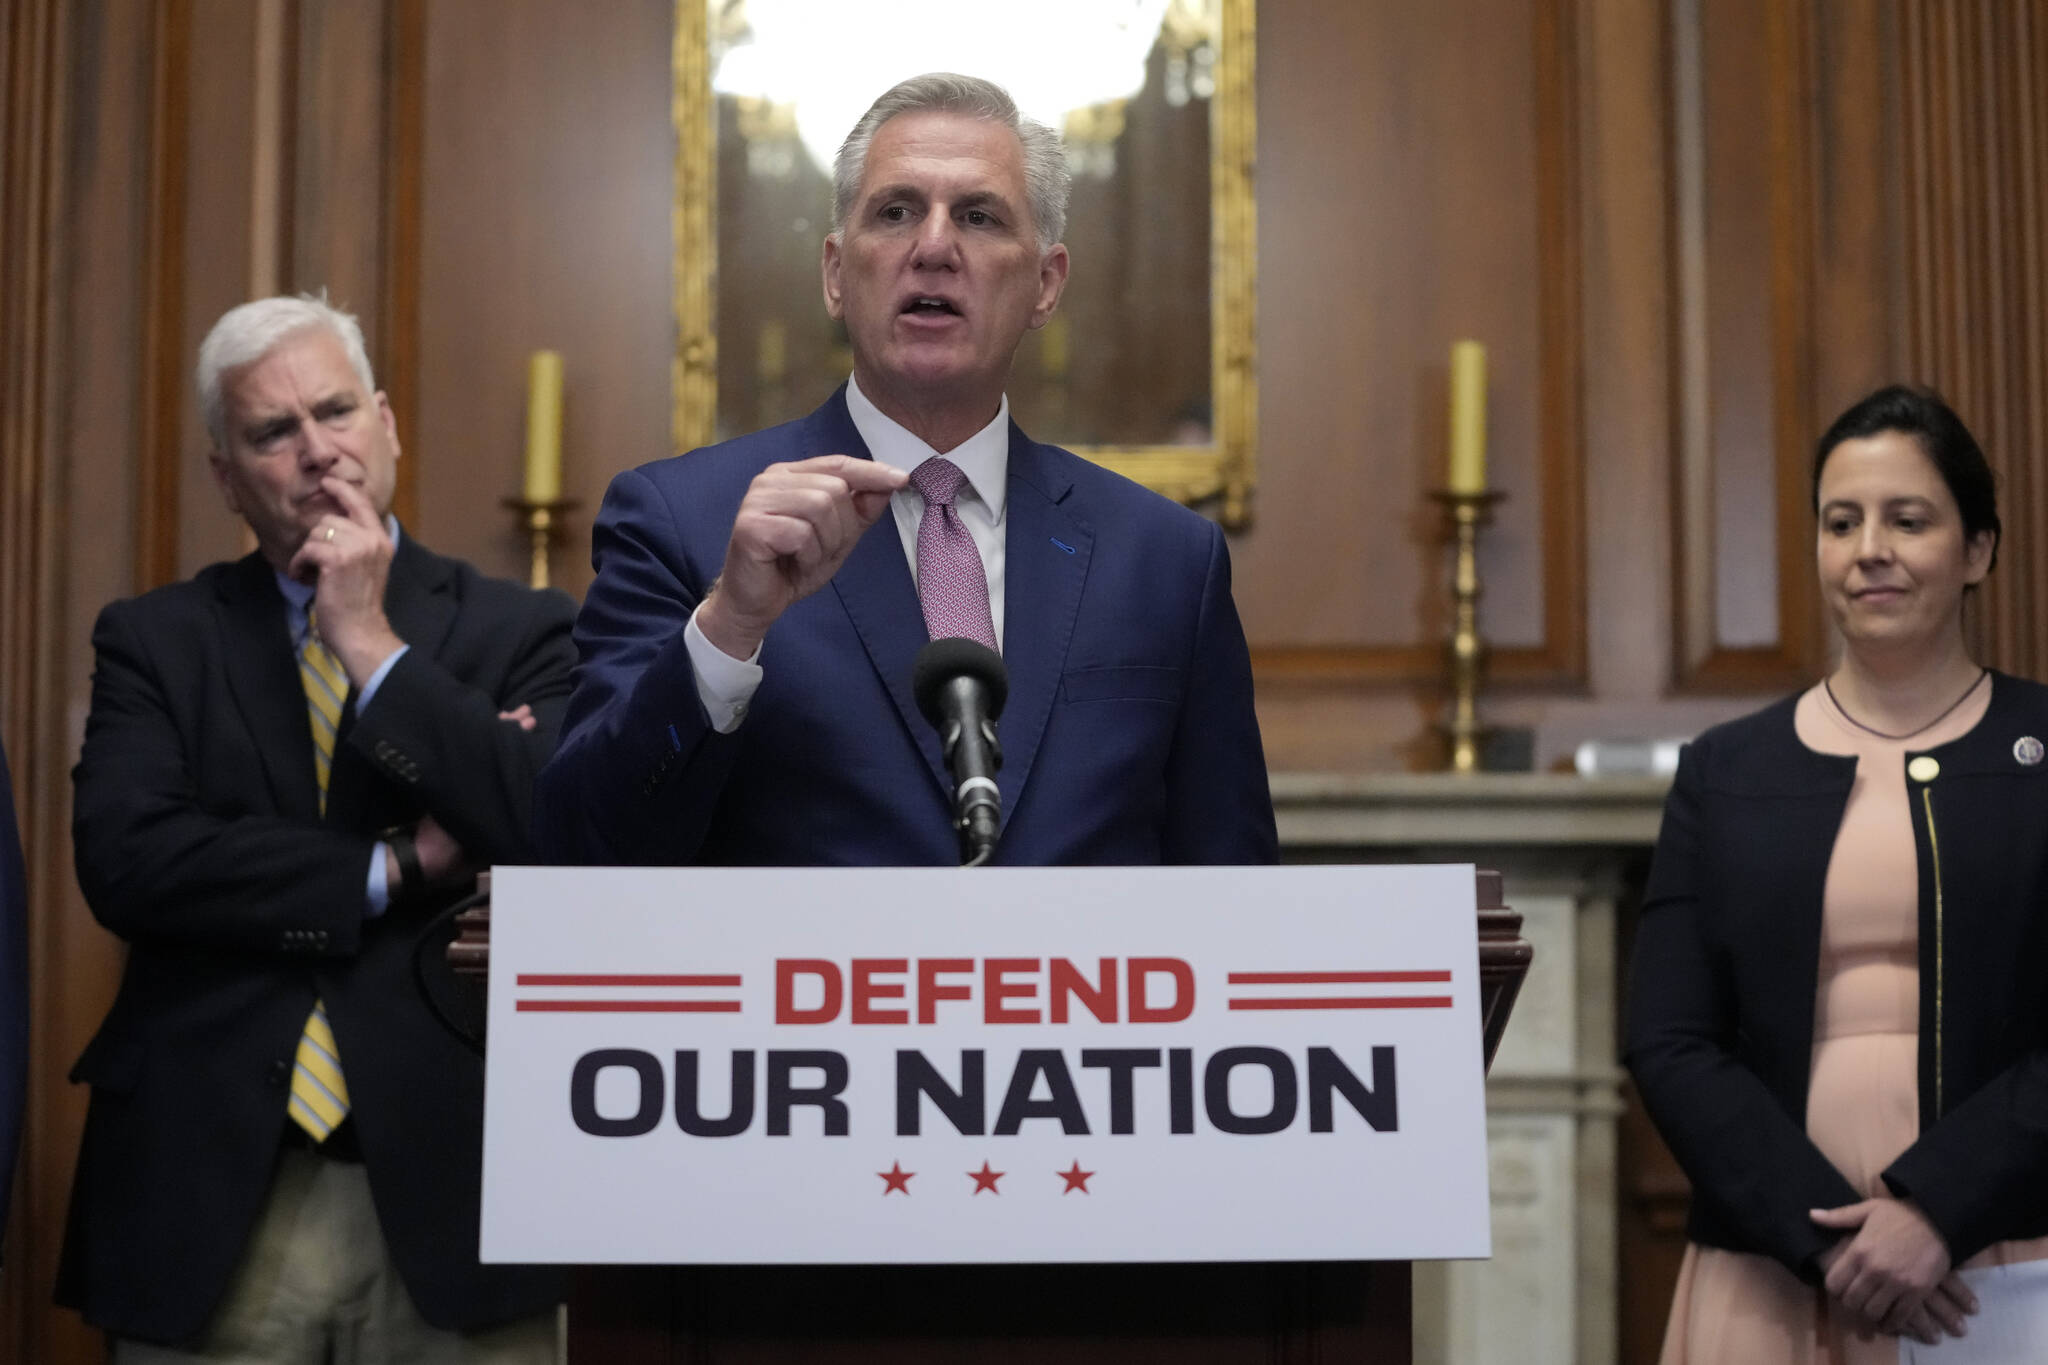 House Speaker Kevin McCarthy of Calif., speaks during a news conference after the House approved an annual defense bill, Friday, July 14, 2023, on Capitol Hill in Washington. Standing behind McCarthy are House Majority Whip Tom Emmer, R-Minn., left, and House Republican Conference Chair Elise Stefanik, R-N.Y. (AP Photo/Patrick Semansky)